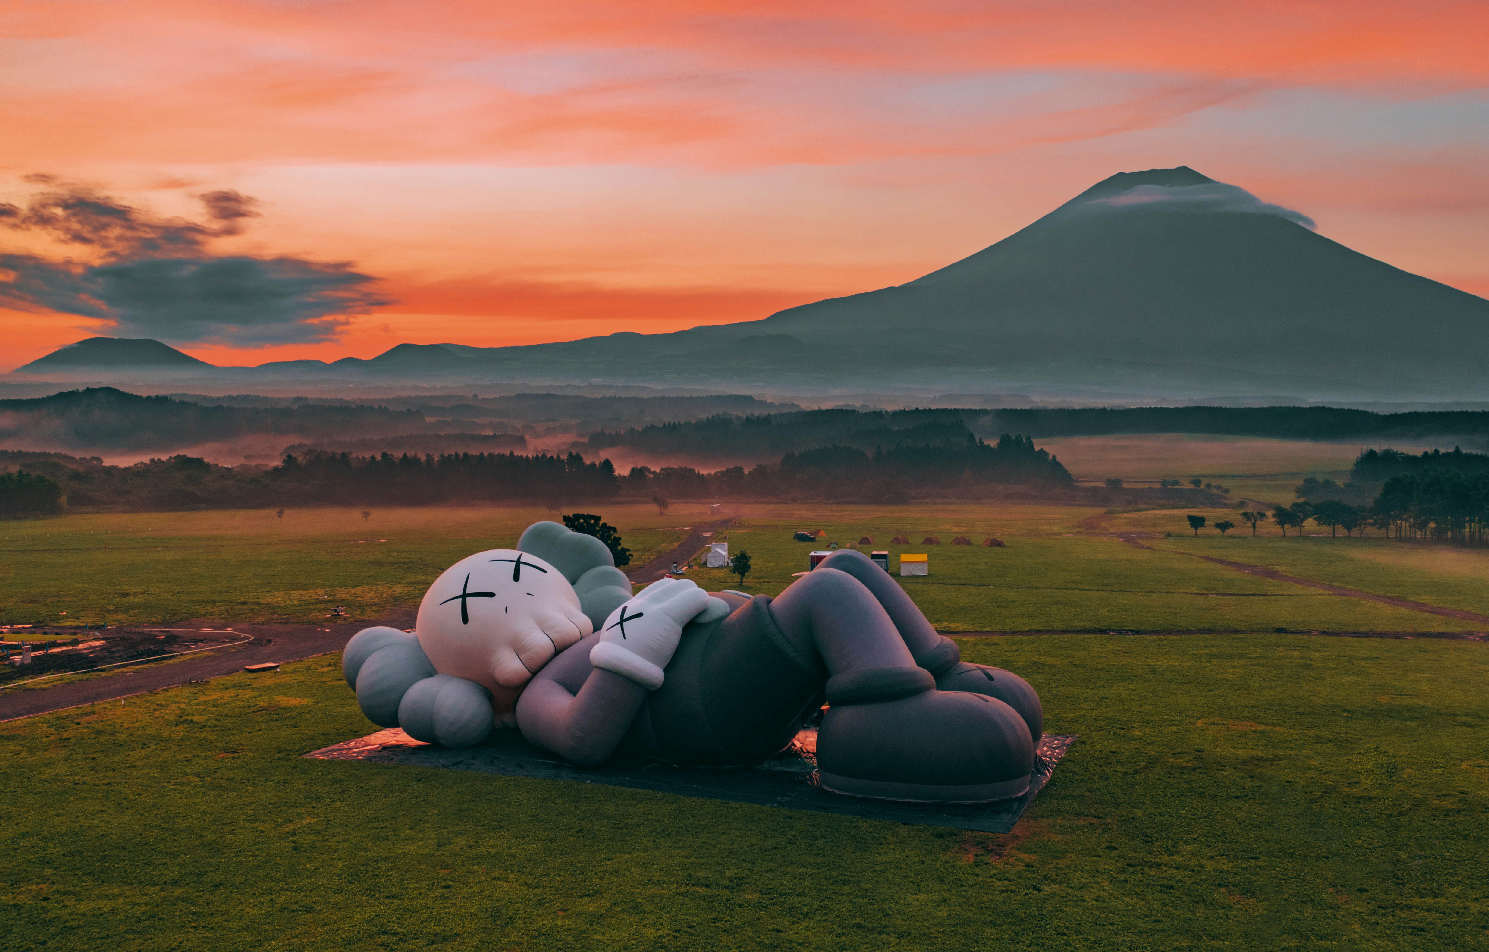 KAWS is now offering balloon rides!